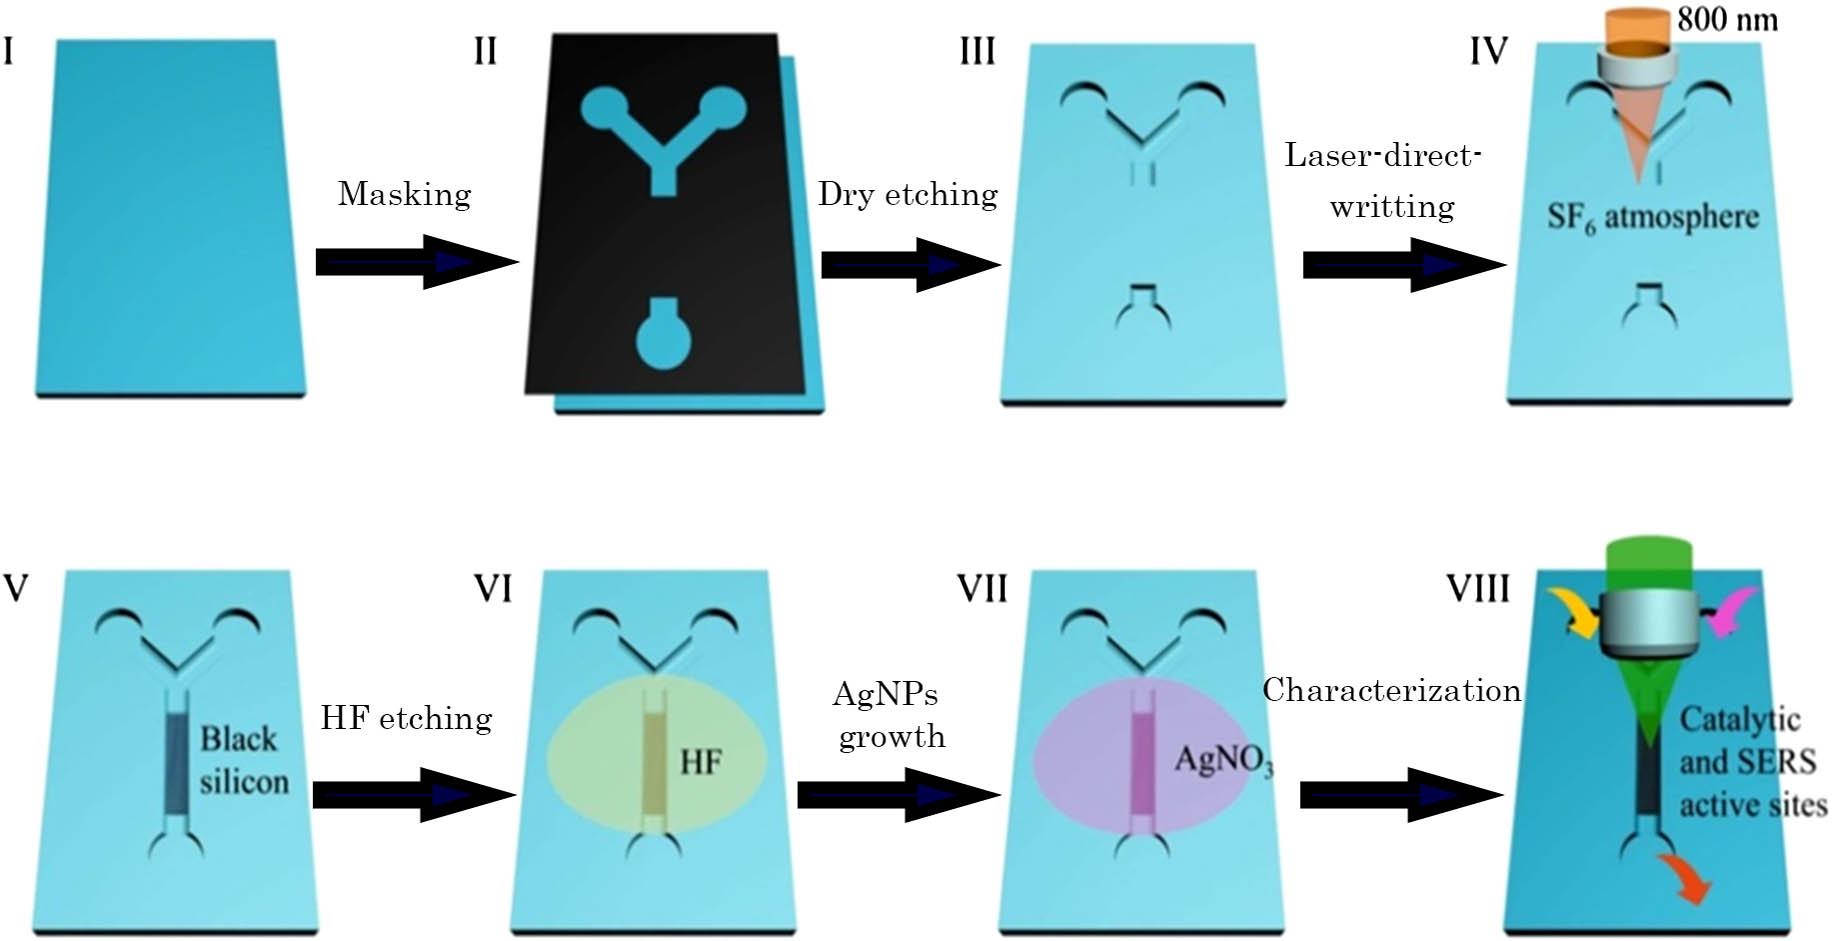 Schematic illustration of the experiment. (I–III) Microfluidic chip fabrication on Si wafer by dry etching. (IV–V) BS fabrication by laser. (VI) HF treatment on BS. (VII) AgNPs’ growth on BS. (VIII) Catalytic reaction and SERS detection on Ag-BS substrate.